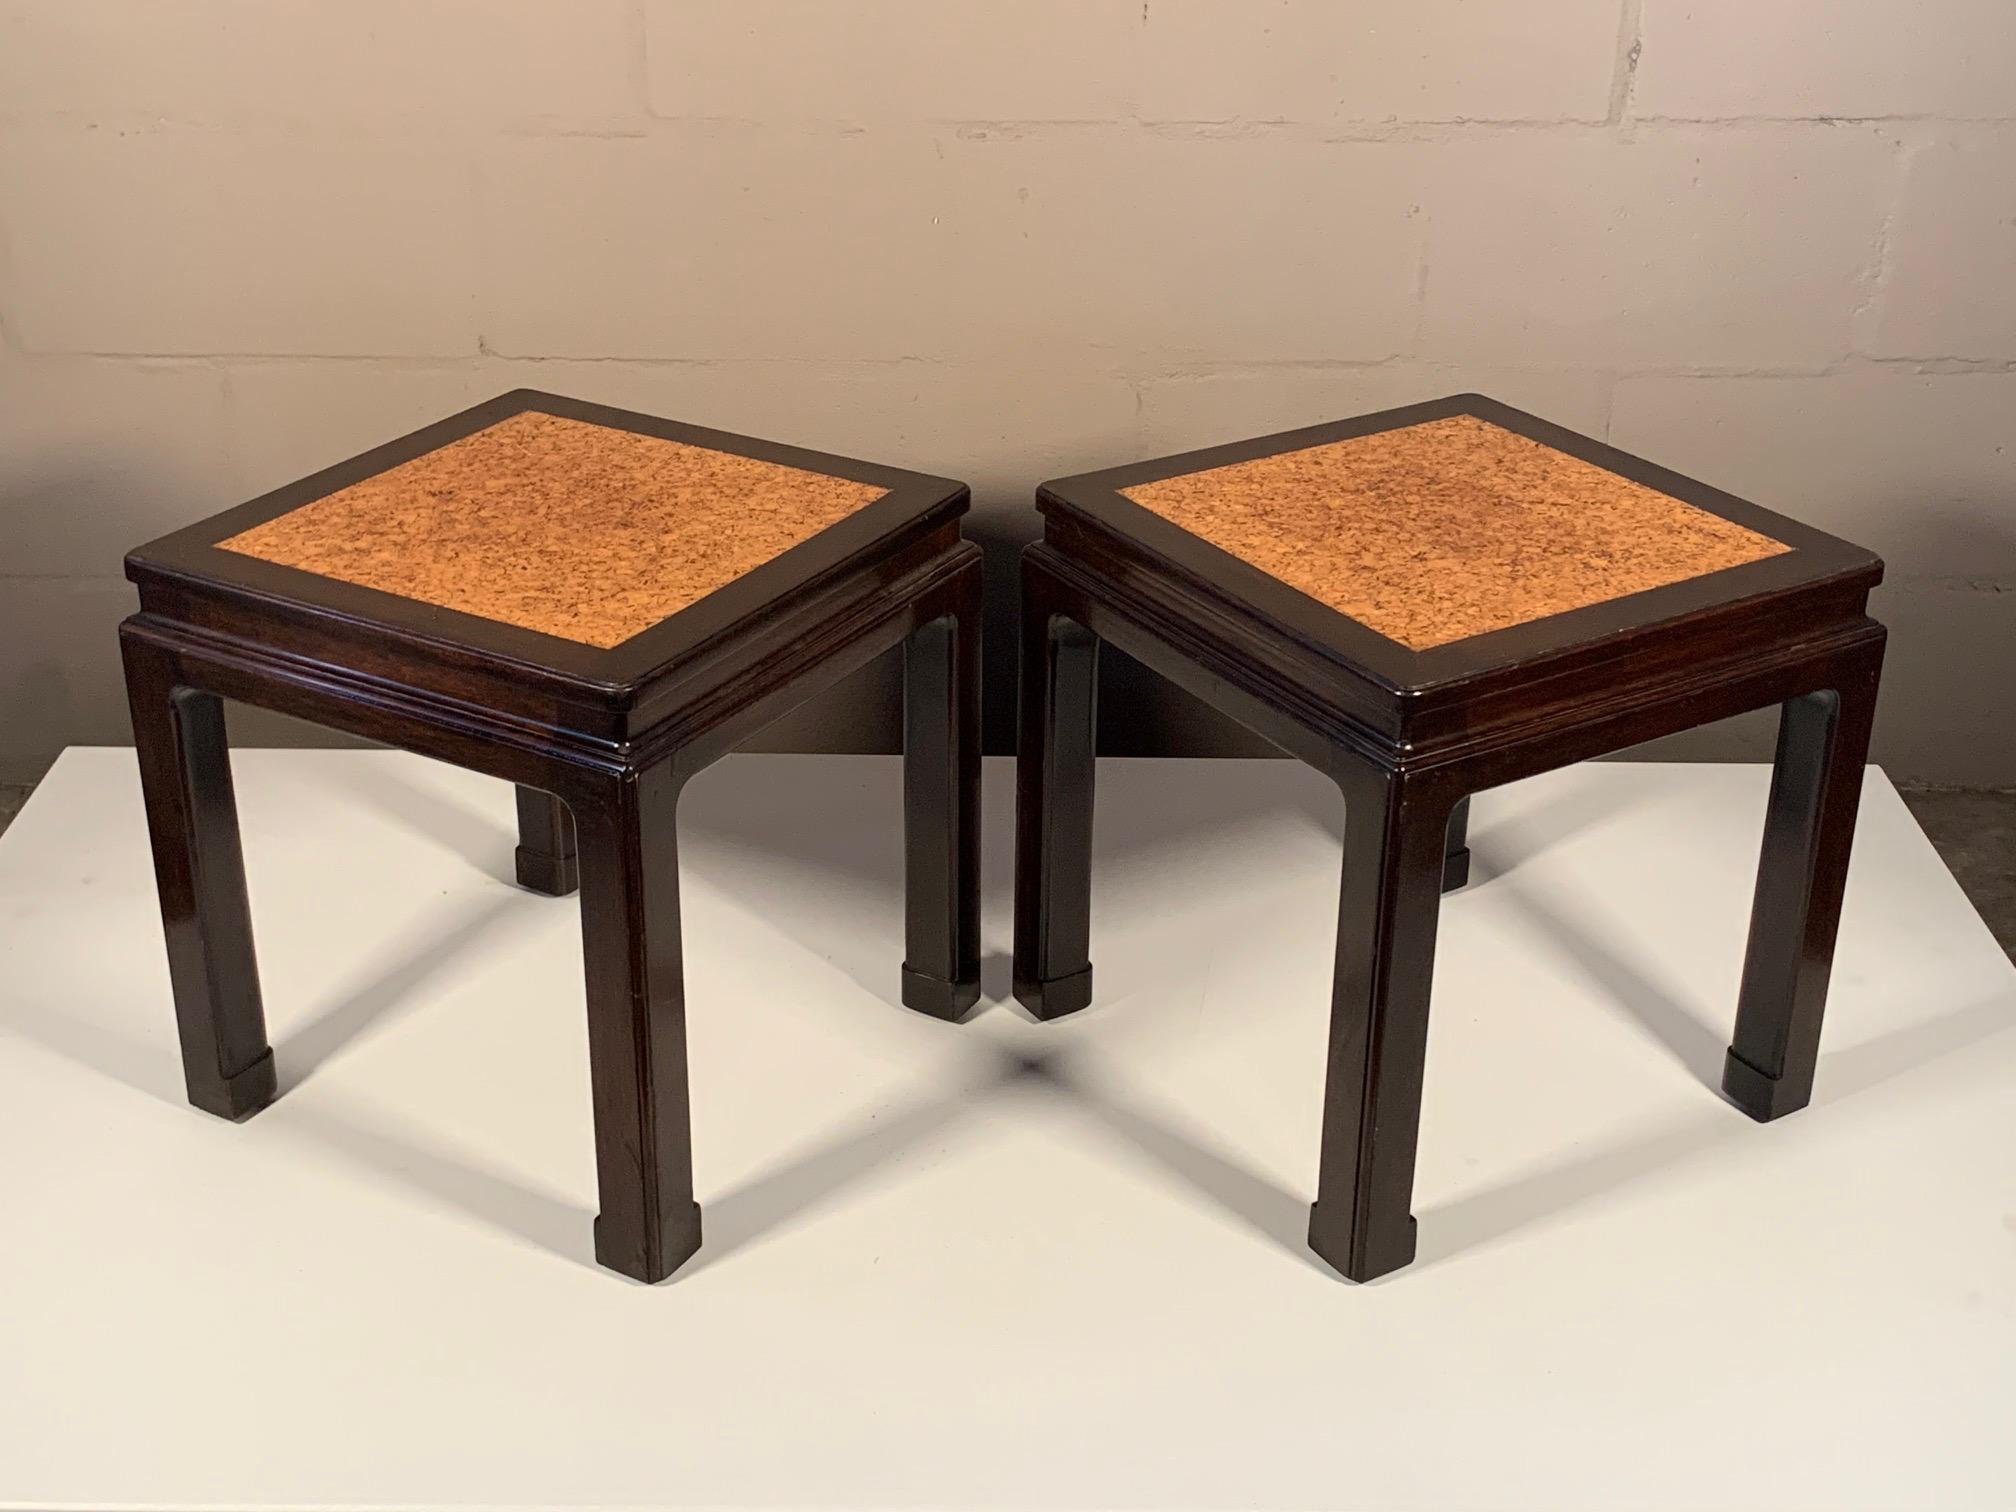 An unusual and rare pair of side tables by Edward Wormley for Dunbar, circa 1940s. Mahogany with original cork tops, Asian Style with green Dunbar labels.